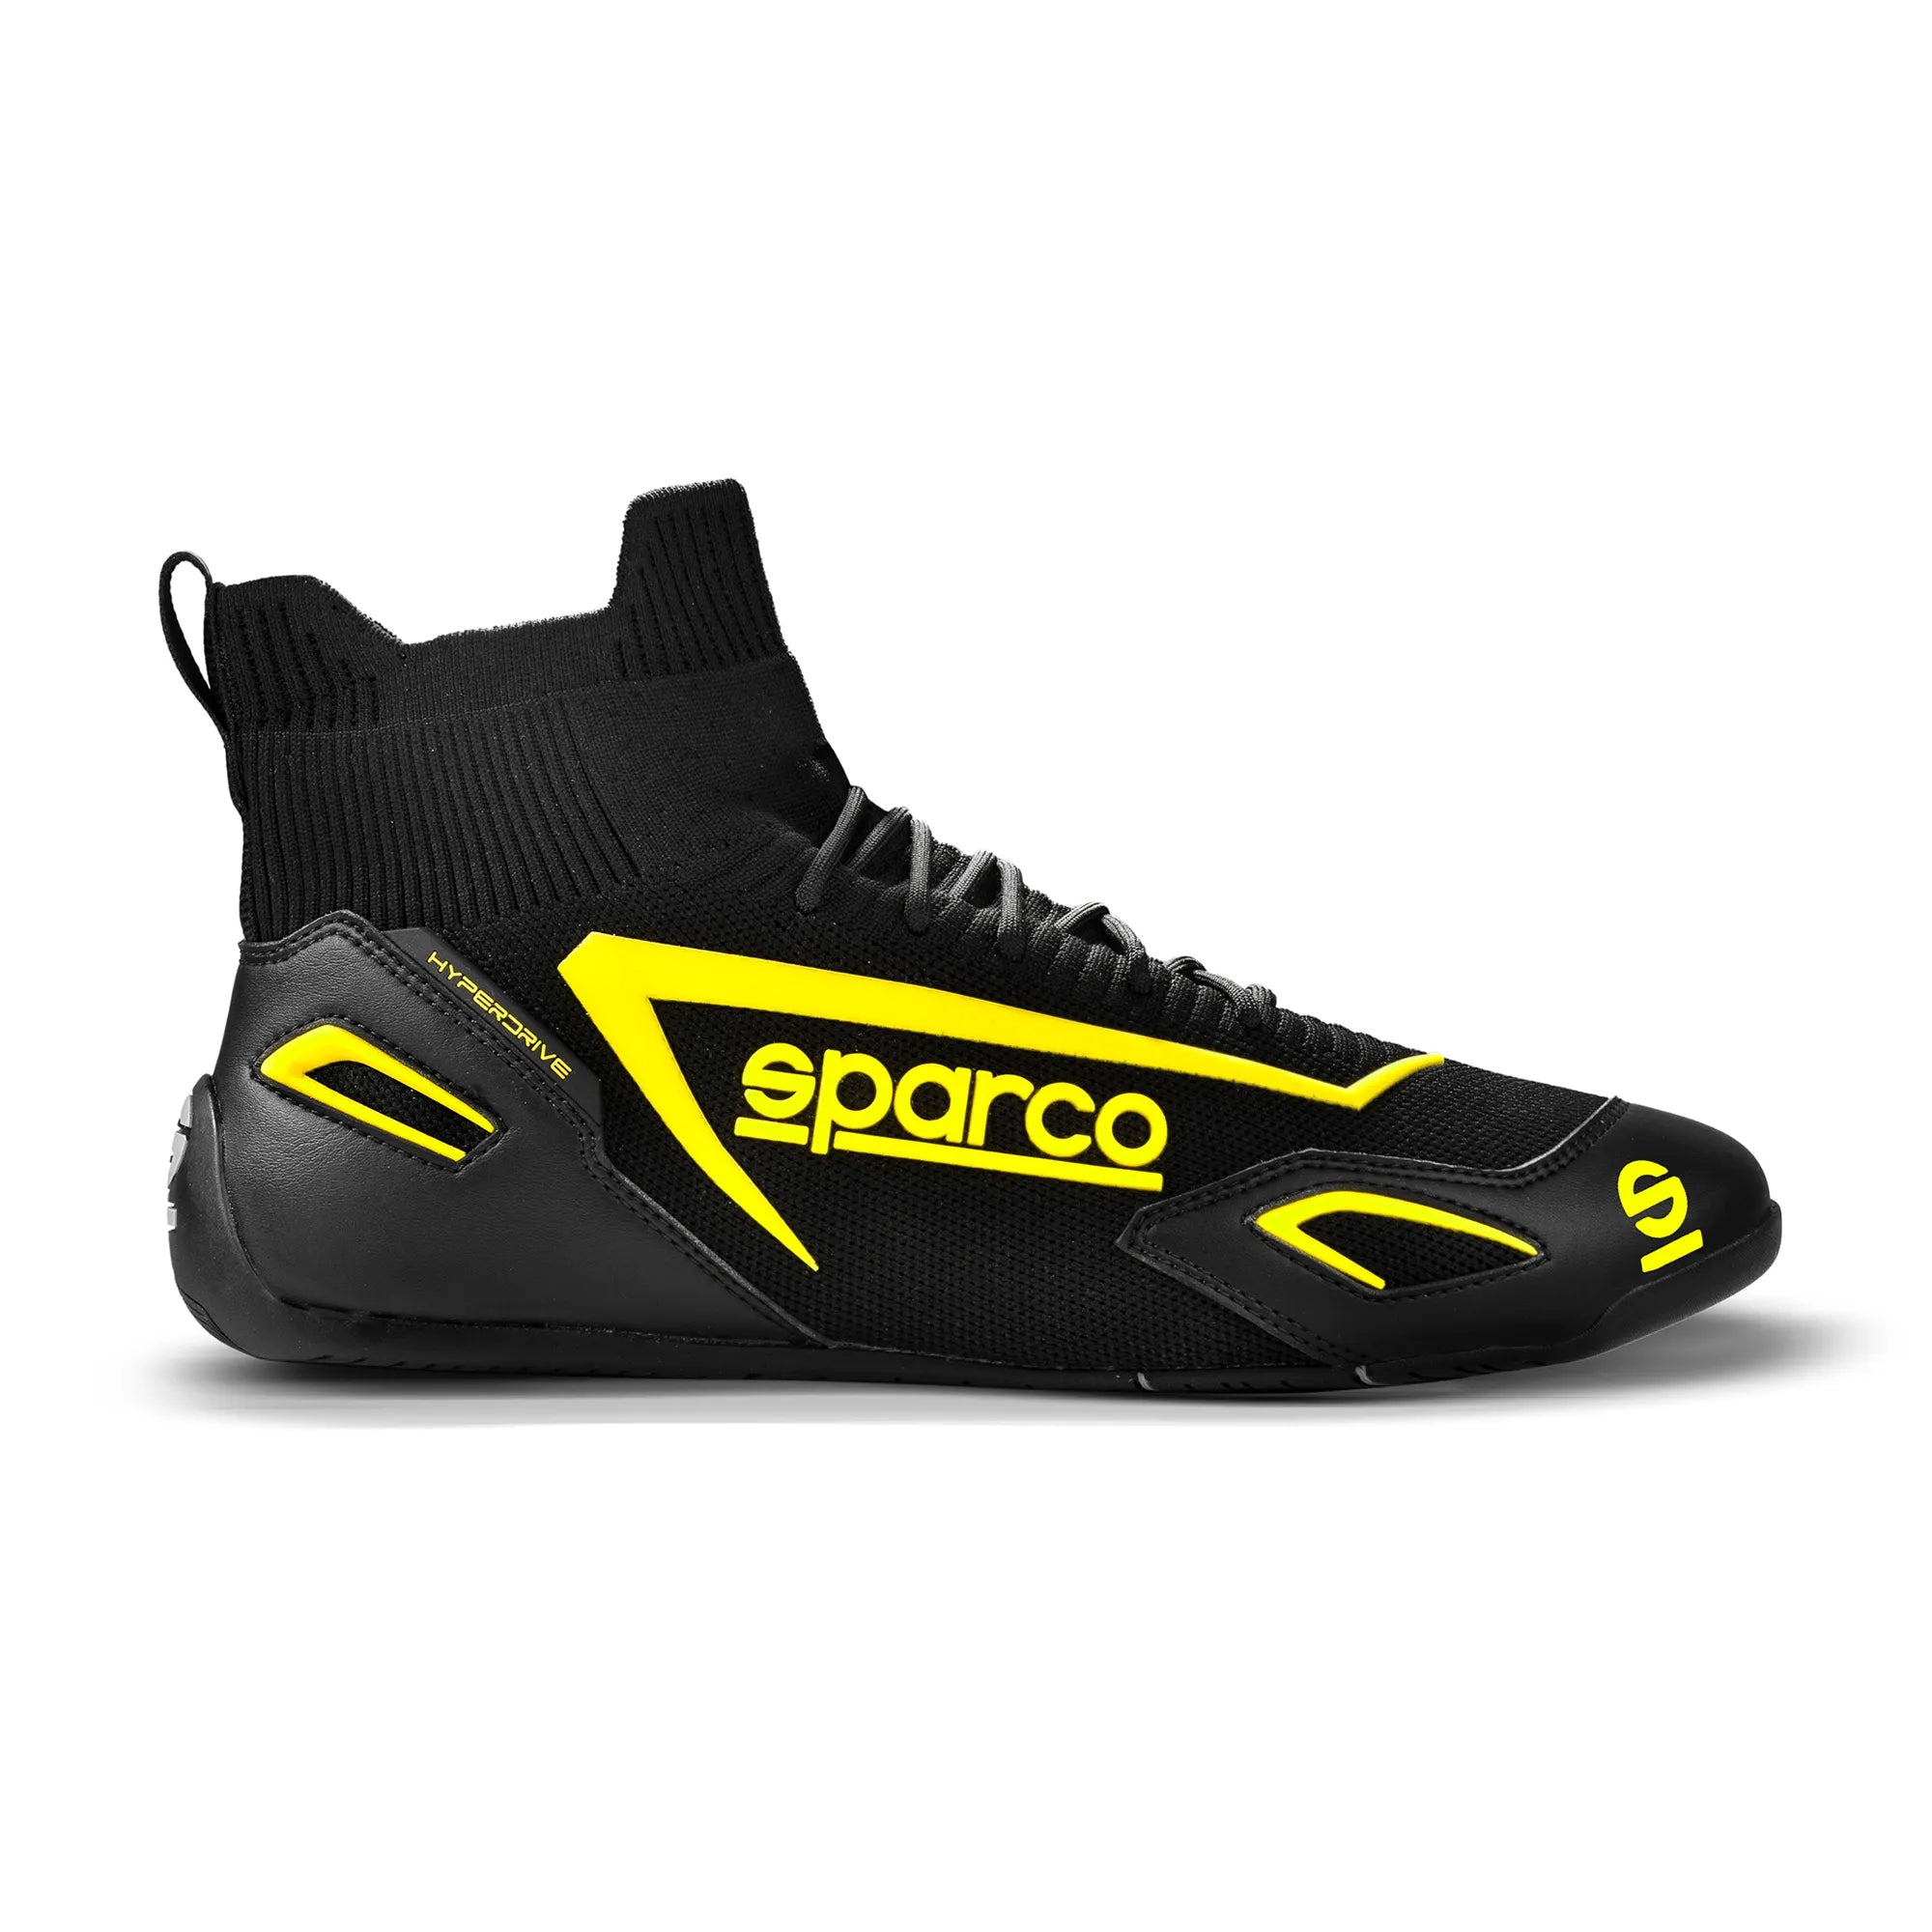 SPARCO 00129345NRGF Gaming sim racing shoes HYPERDRIVE, black/yellow, size 45 Photo-0 